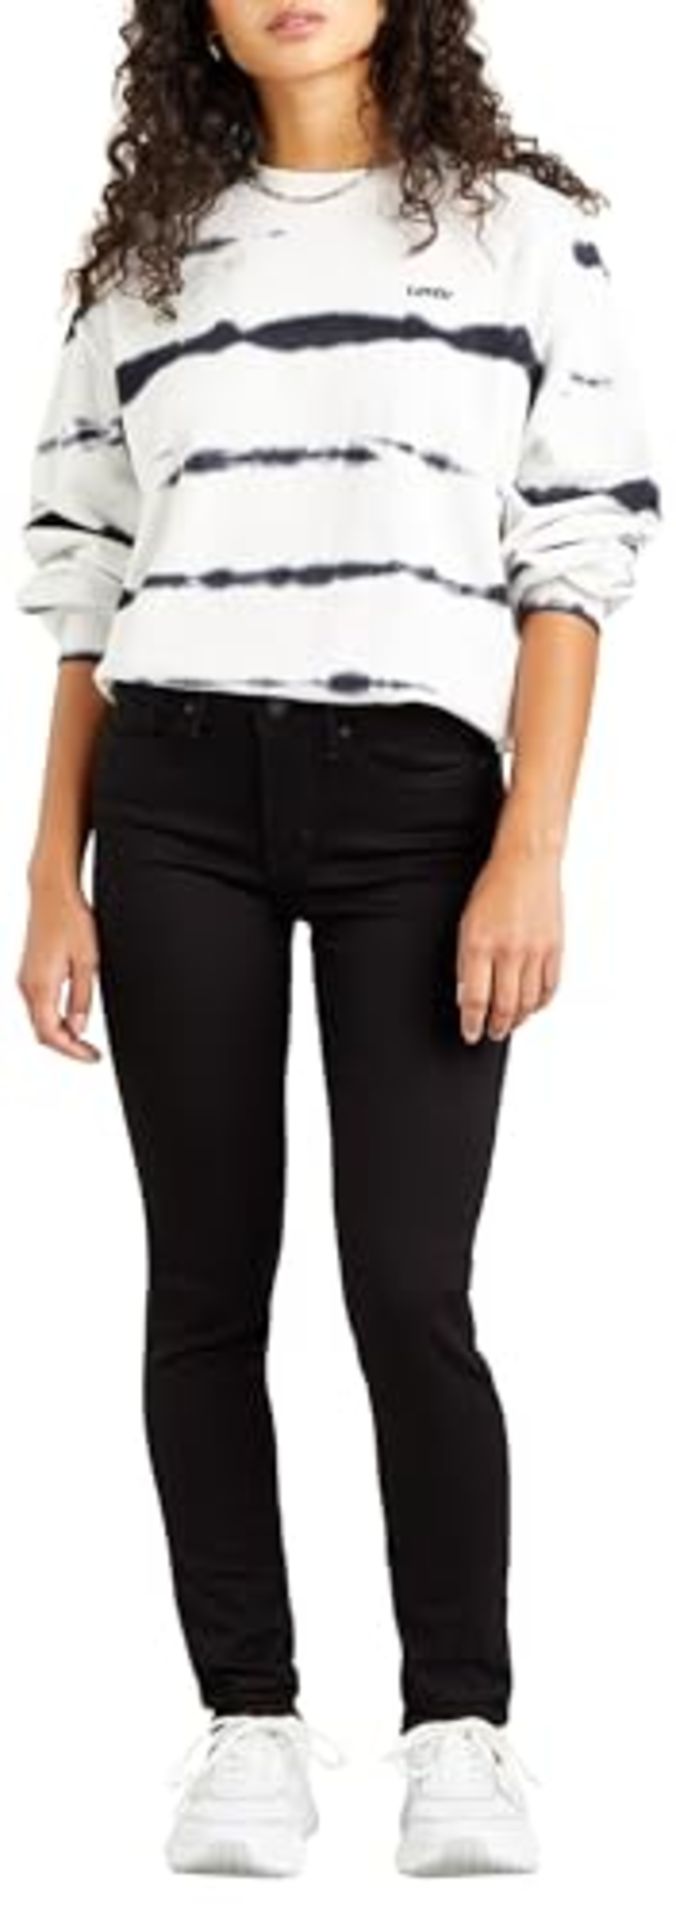 RRP £71.00 Levi's 311 Shaping Skinny Jeans for Women, Black and Black, 26W/30L - Image 4 of 6